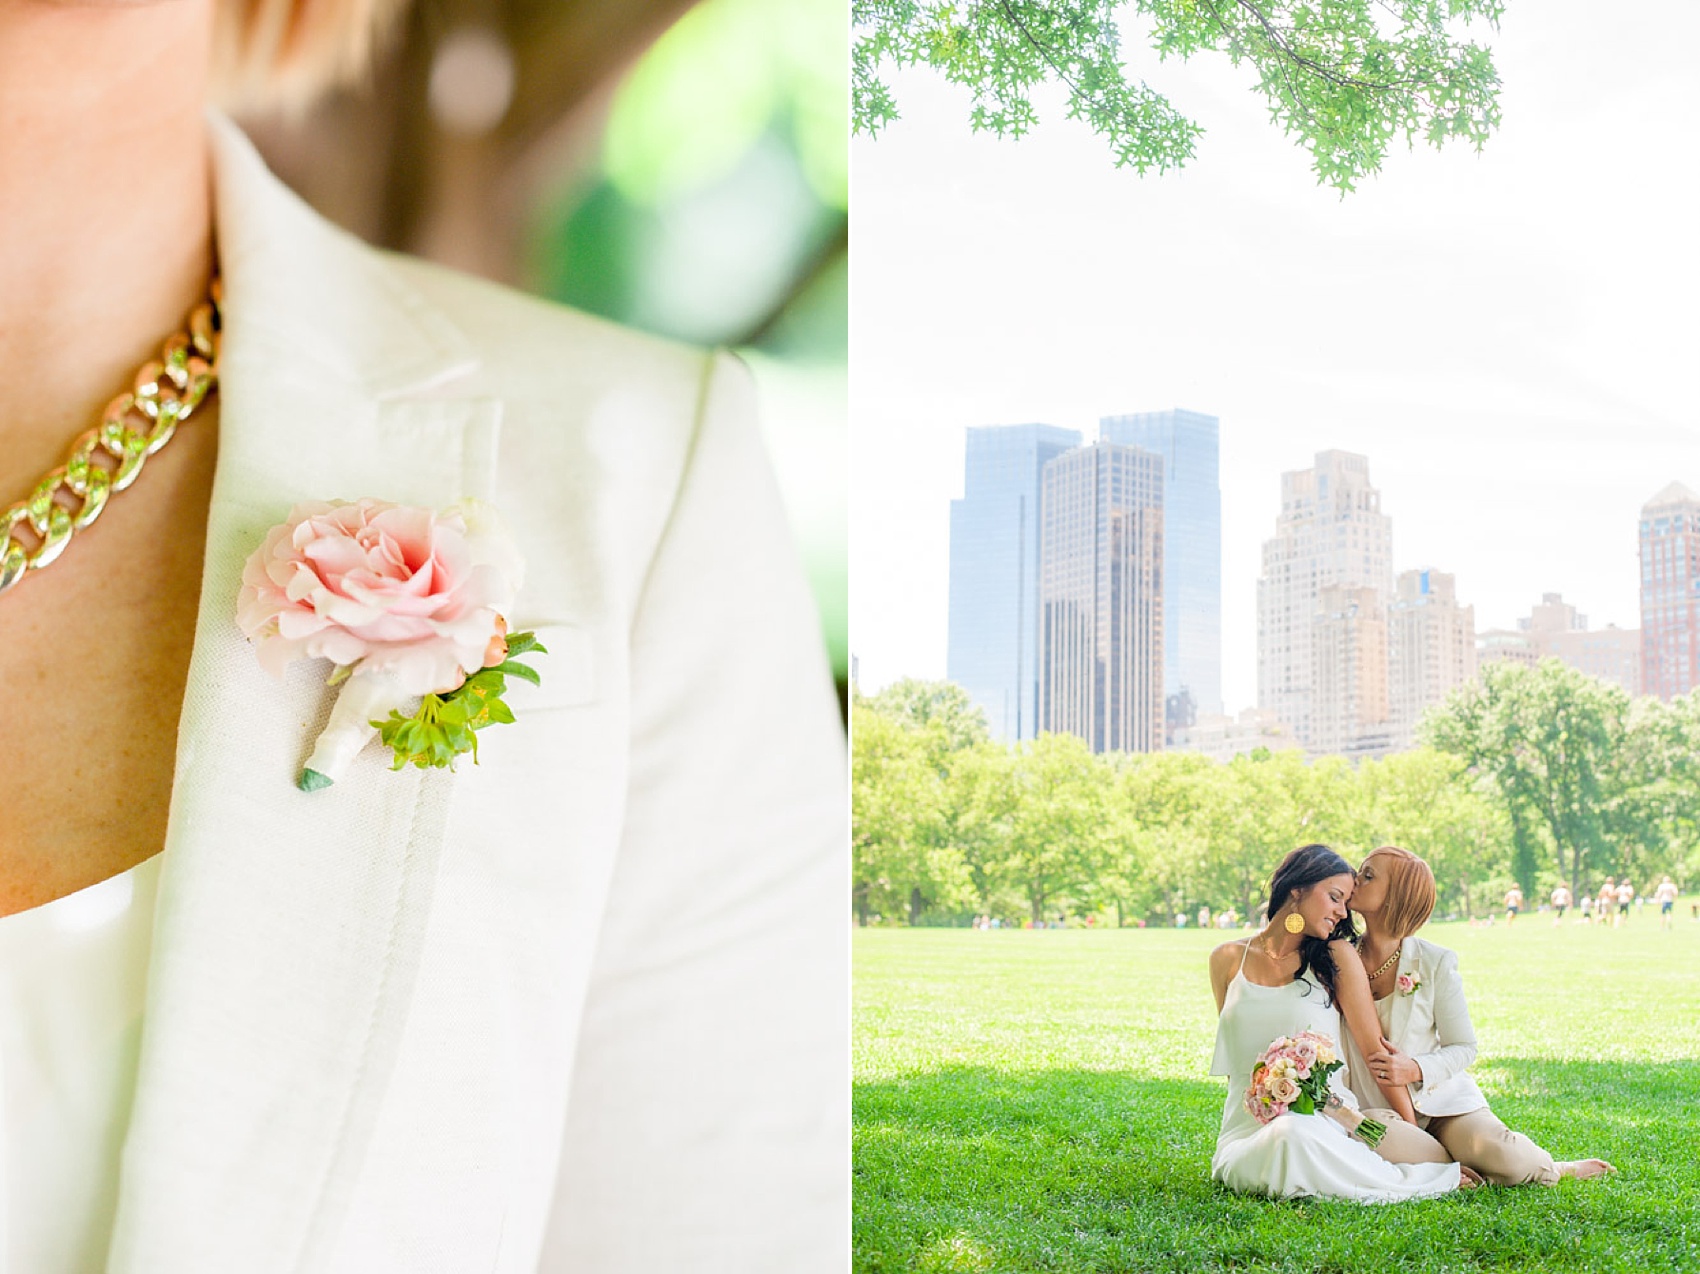 Central Park same sex elopement. Wedding photos by Mikkel Paige Photography. #nyc #centralparkelopement #samesexmarriage #equality #gayrights #equalrights #nycweddingphotographer